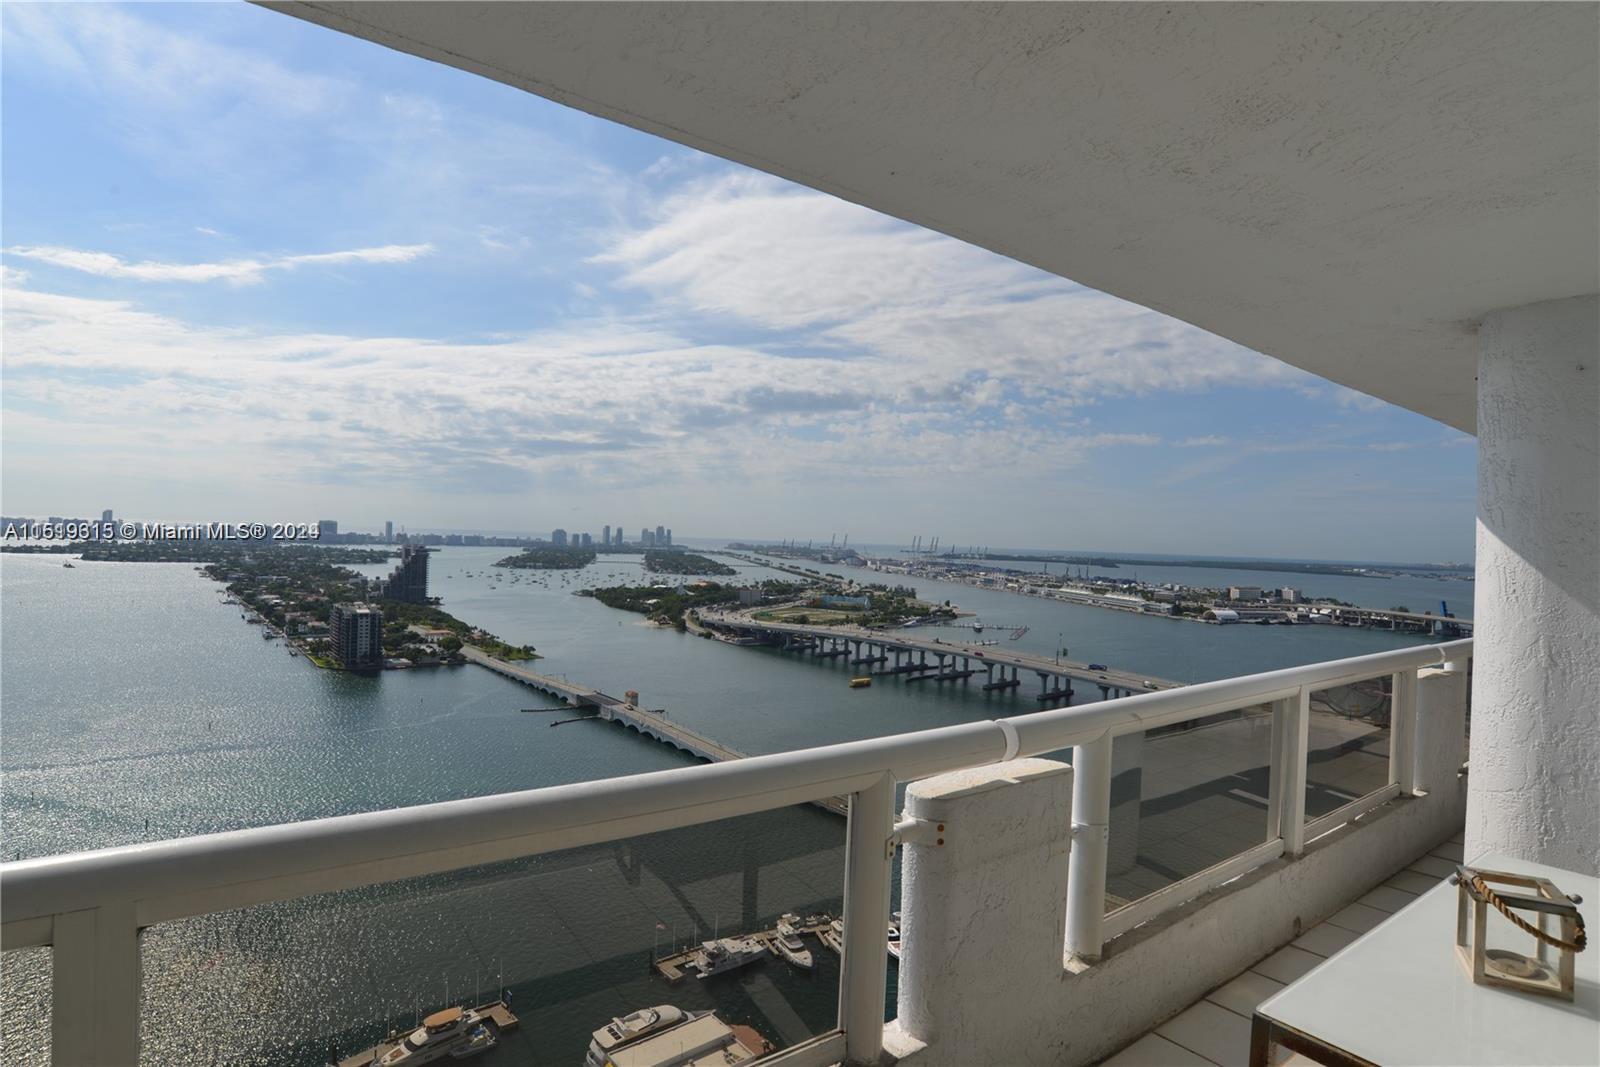 Beautiful, bright and fully furnished 2 bedroom penthouse with a breathtaking view of Biscayne Bay.
It is located at The Grand which is a stylish bay front condominium with a wonderful bay views and five star amenities. Adjacent to Margaret Pace Park, you will have access to tennis and basketball courtesans dog parks.
This waterfront condo hotel provides residents with an in-house grocery store, restaurants, a beauty salon, liquor store, dry cleaner, full service marina.